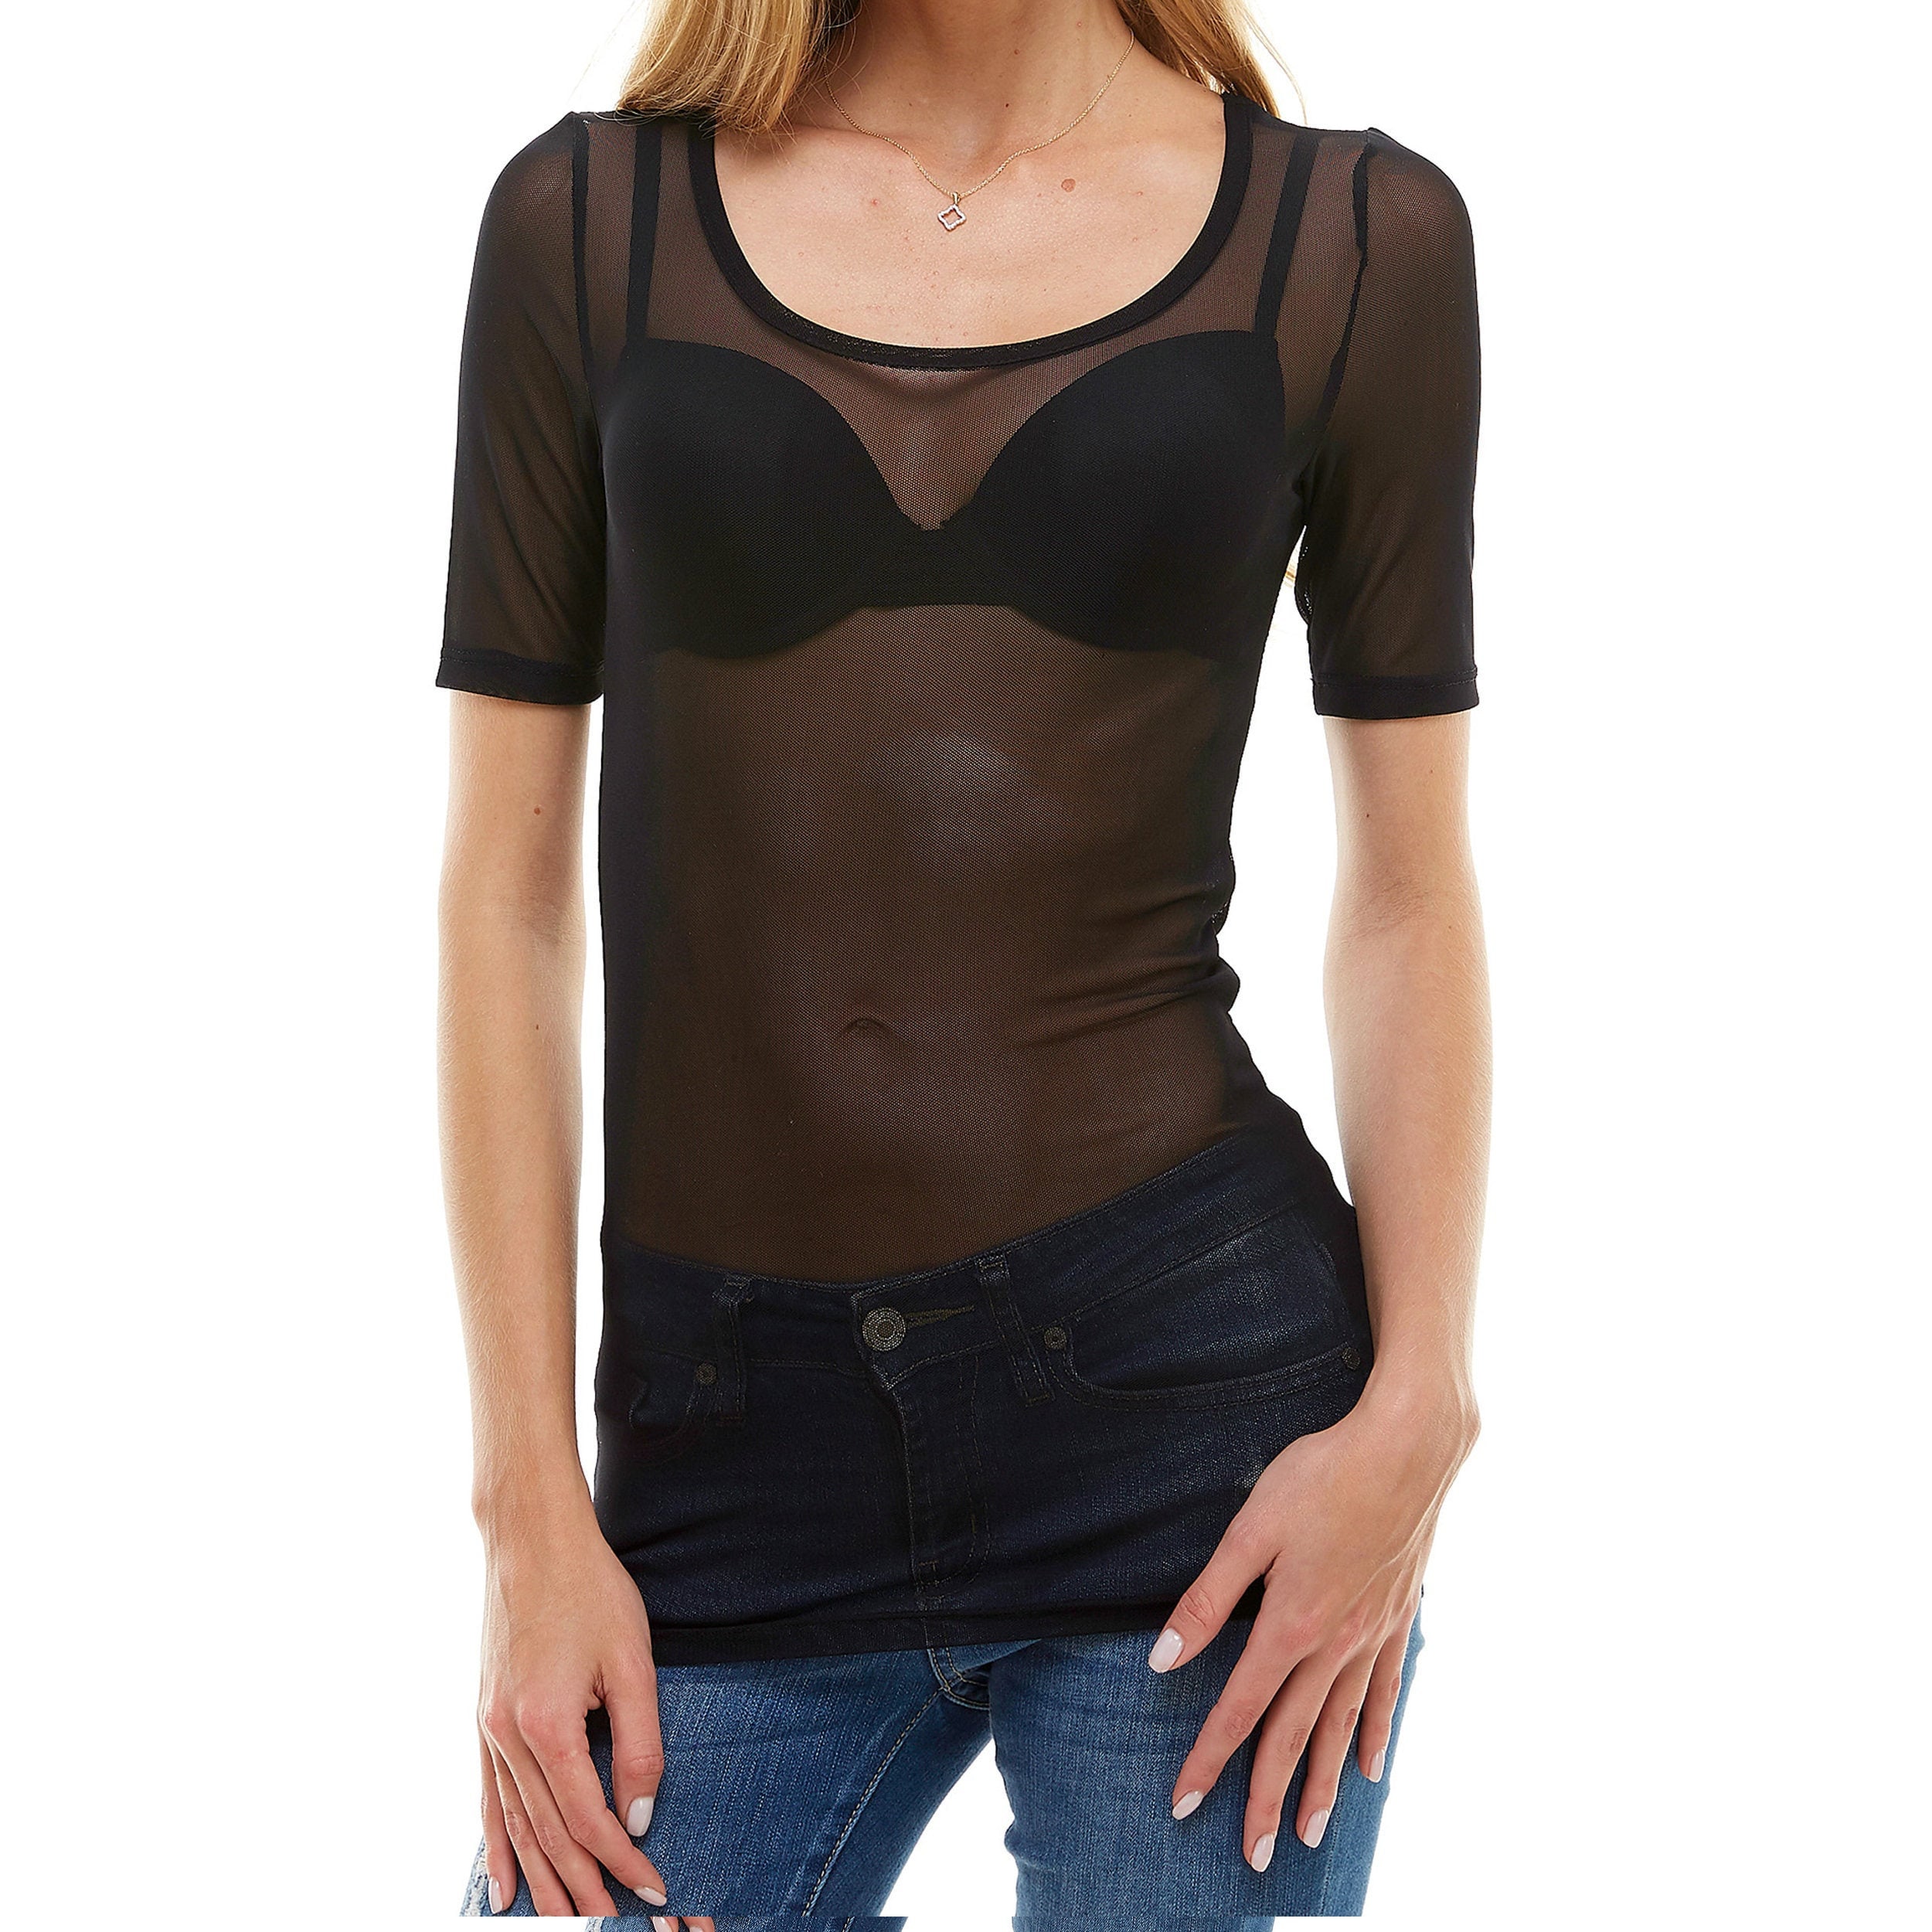 See Through Tops - Etsy